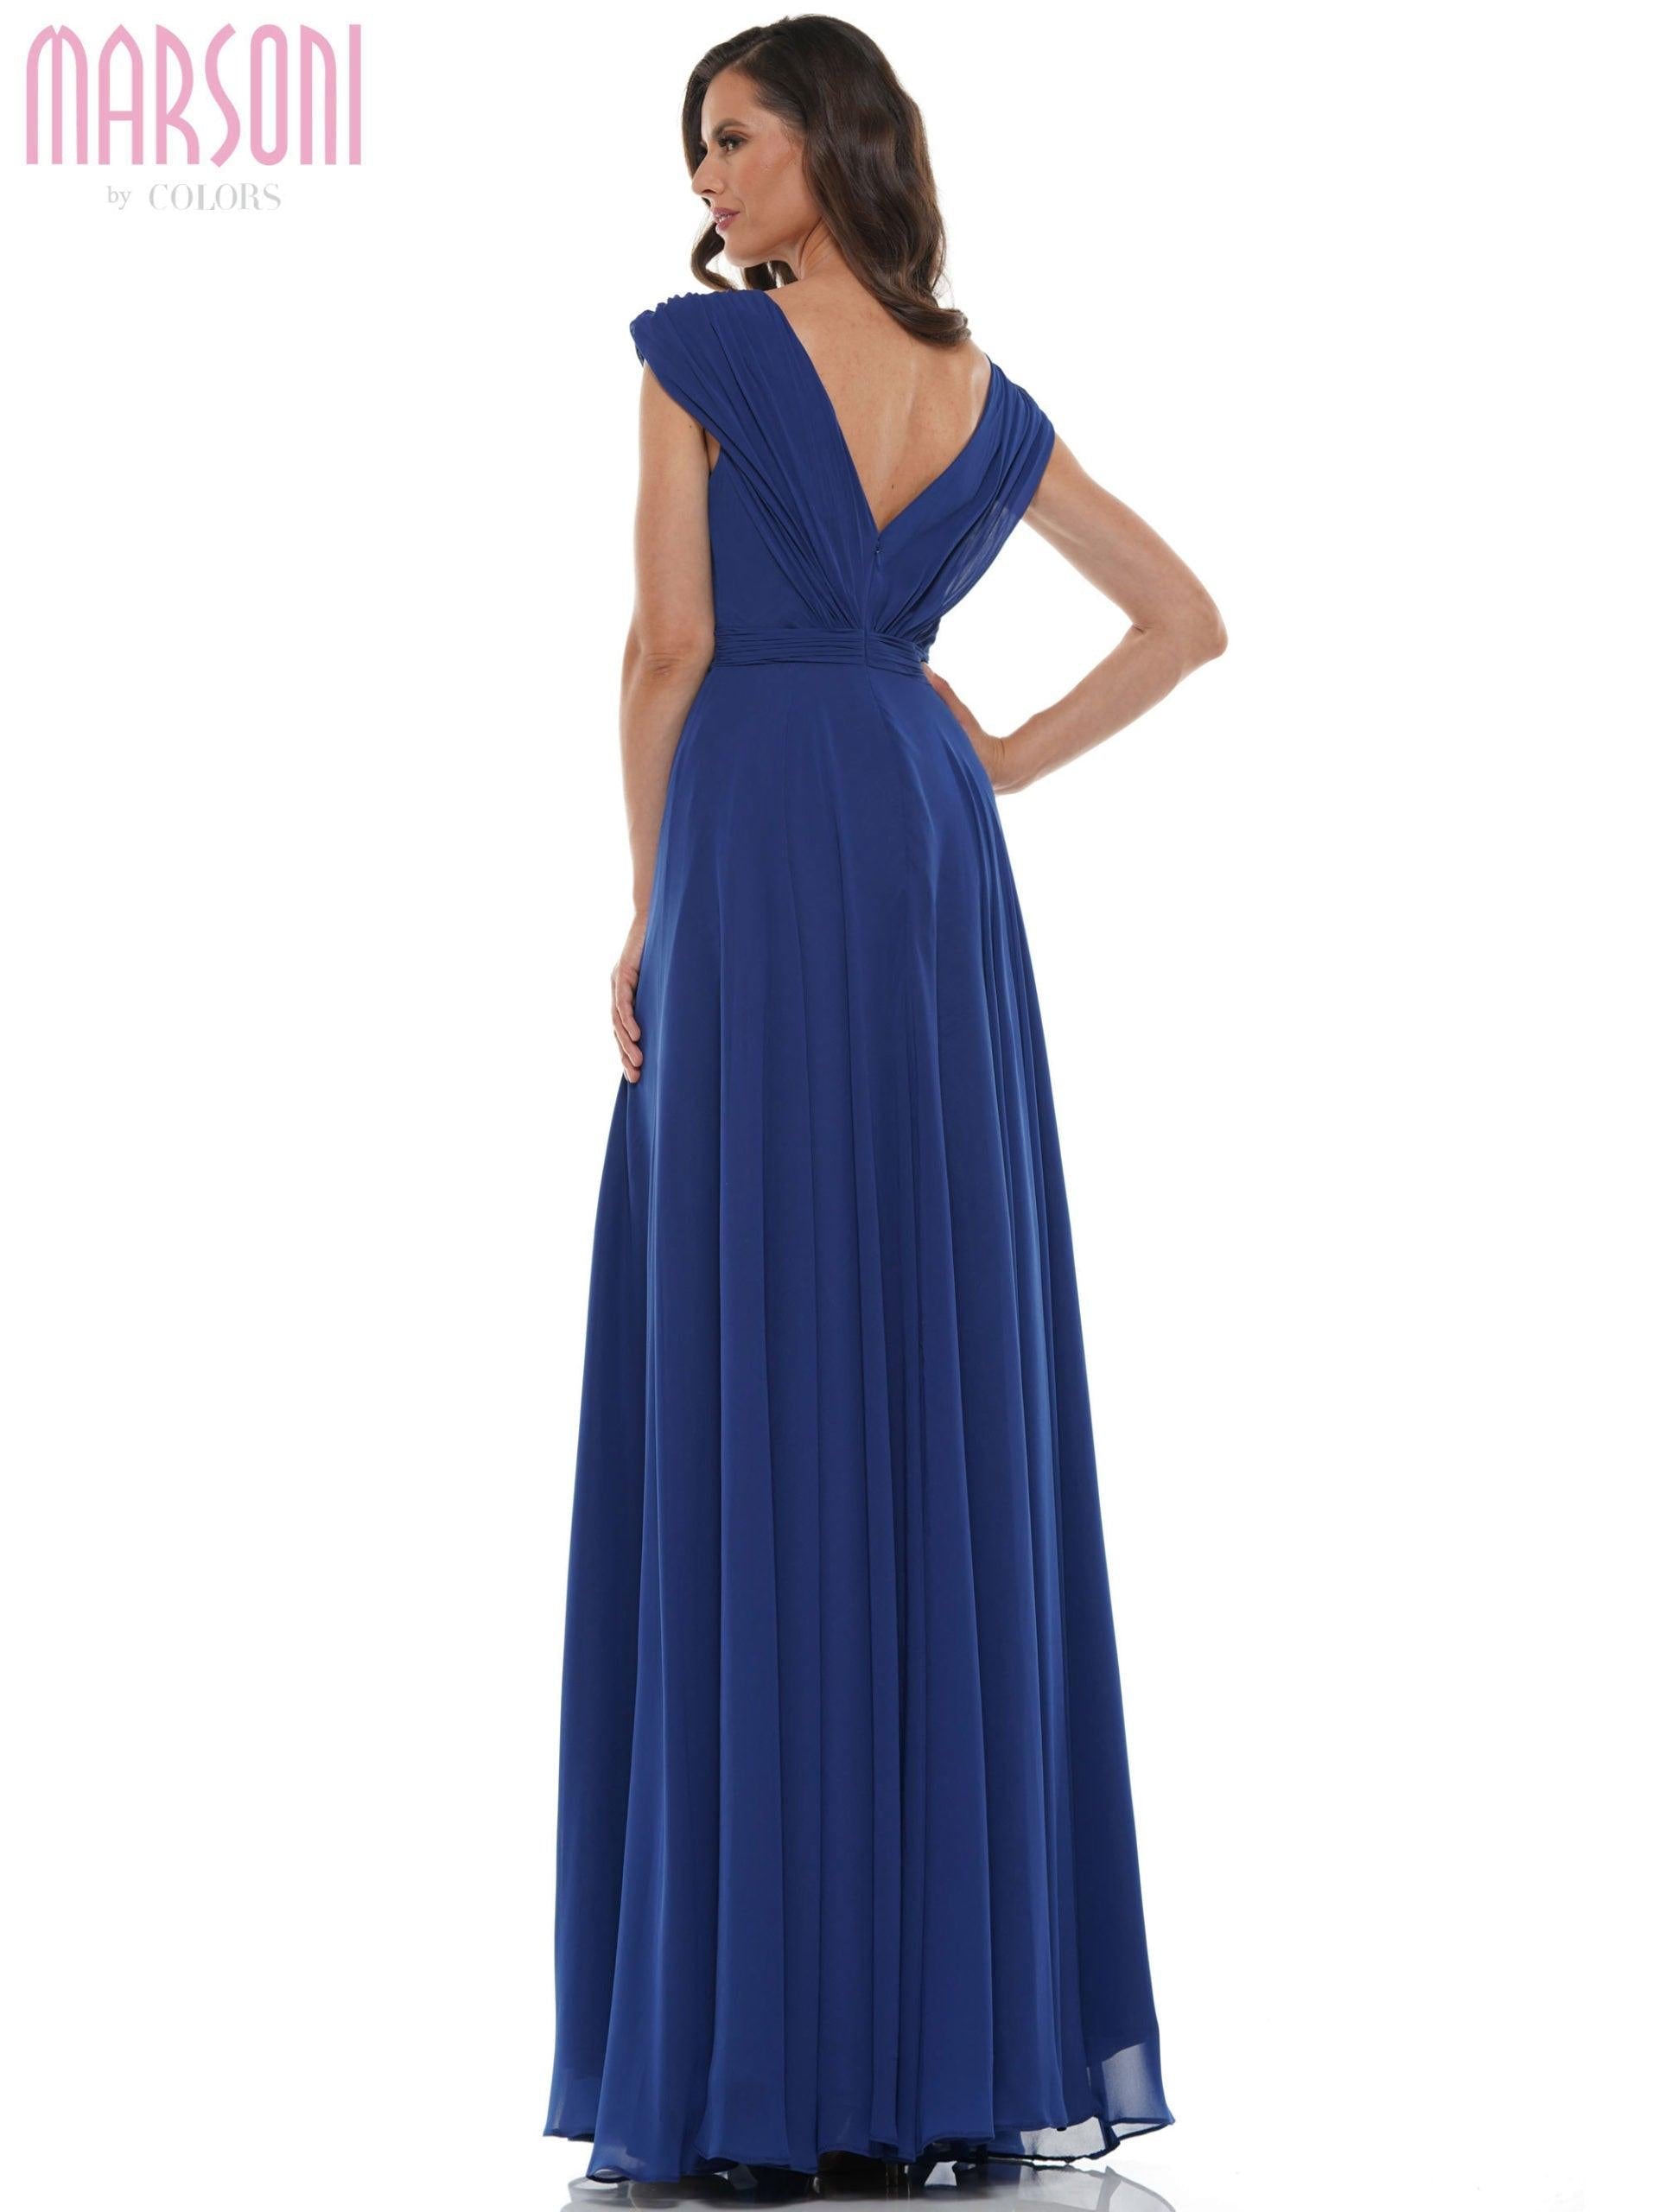 Marsoni Formal Mother of the Bride Long Dress 251 | The Dress Outlet